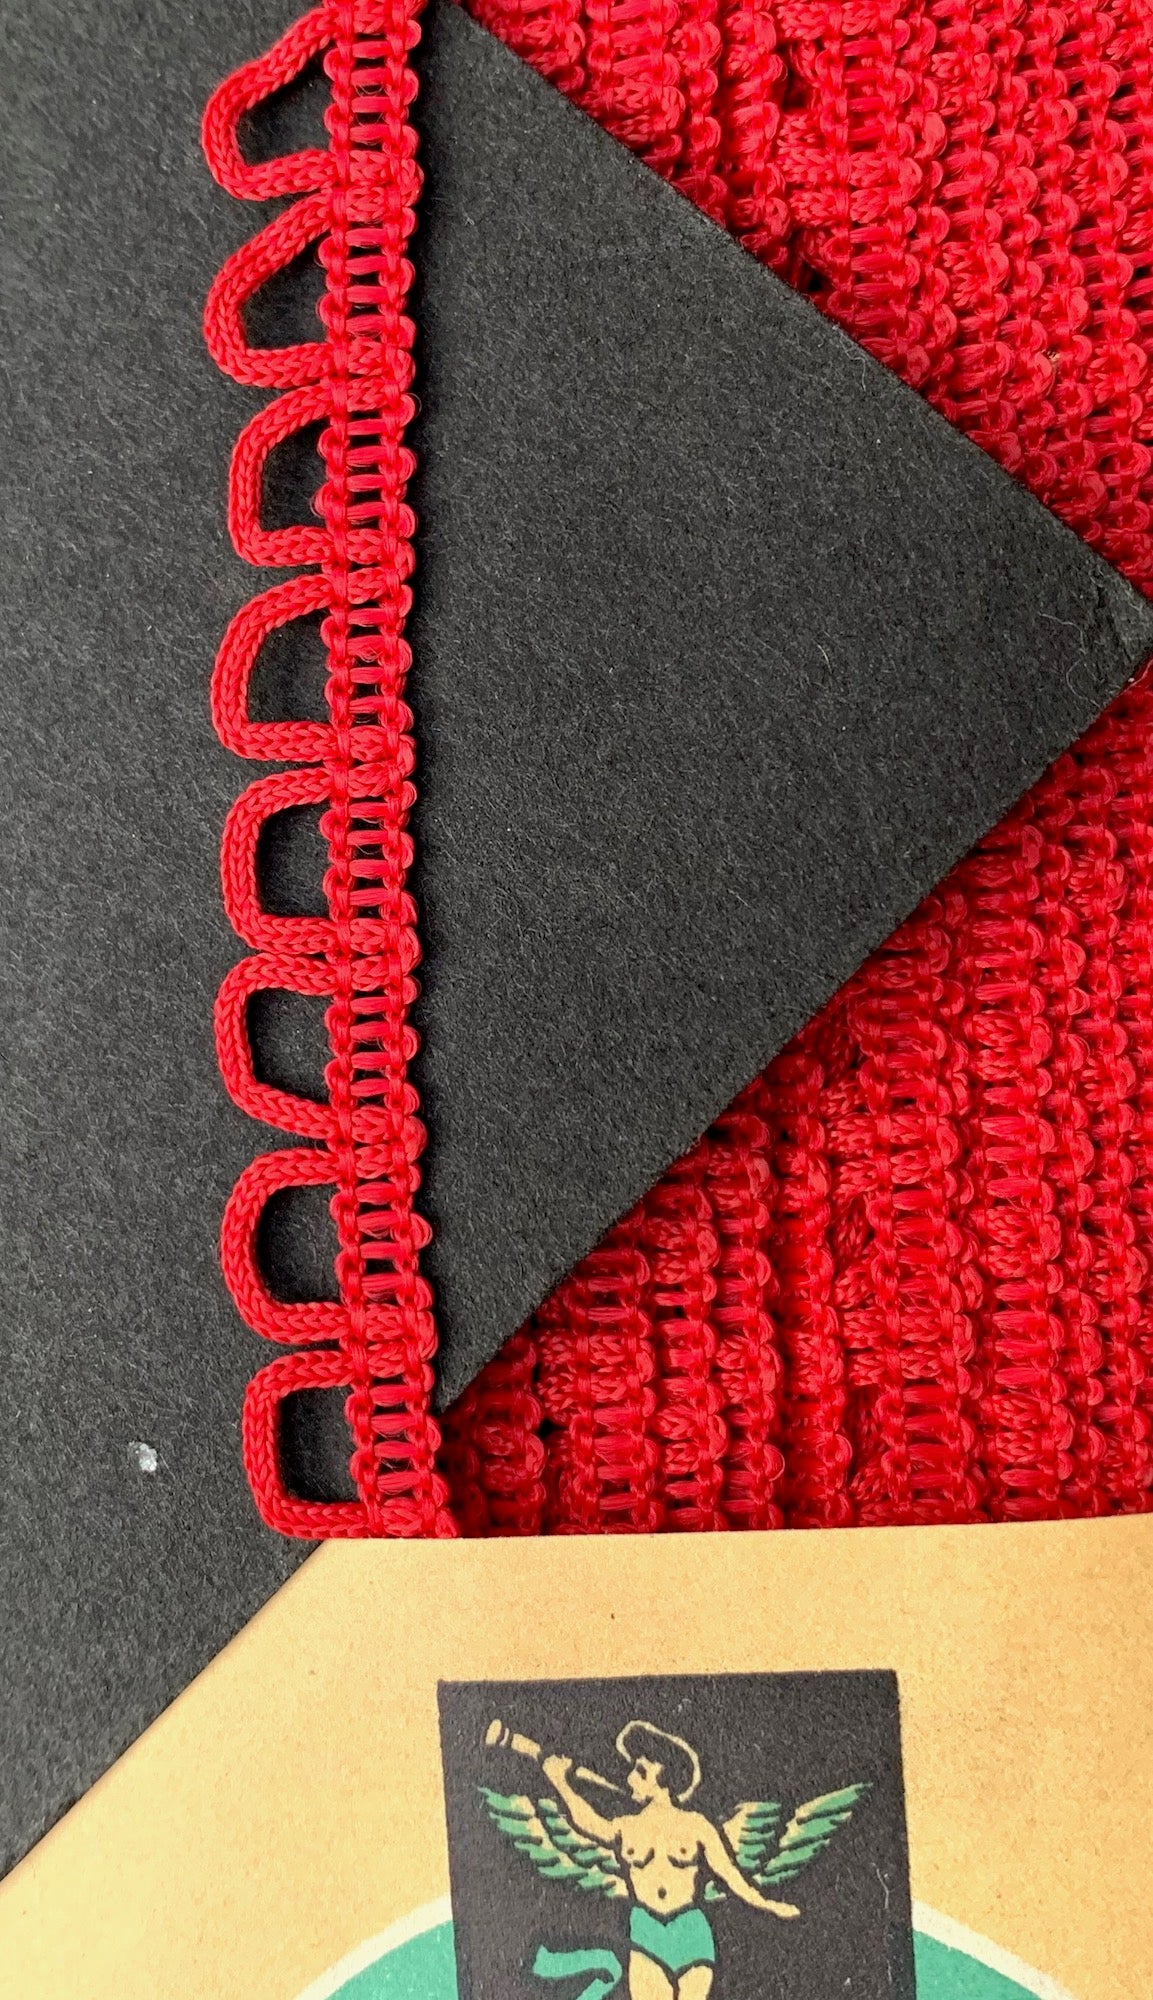 36yds Quietly Dramatic Looped Red Vintage Trim -1cm wide - Made in England